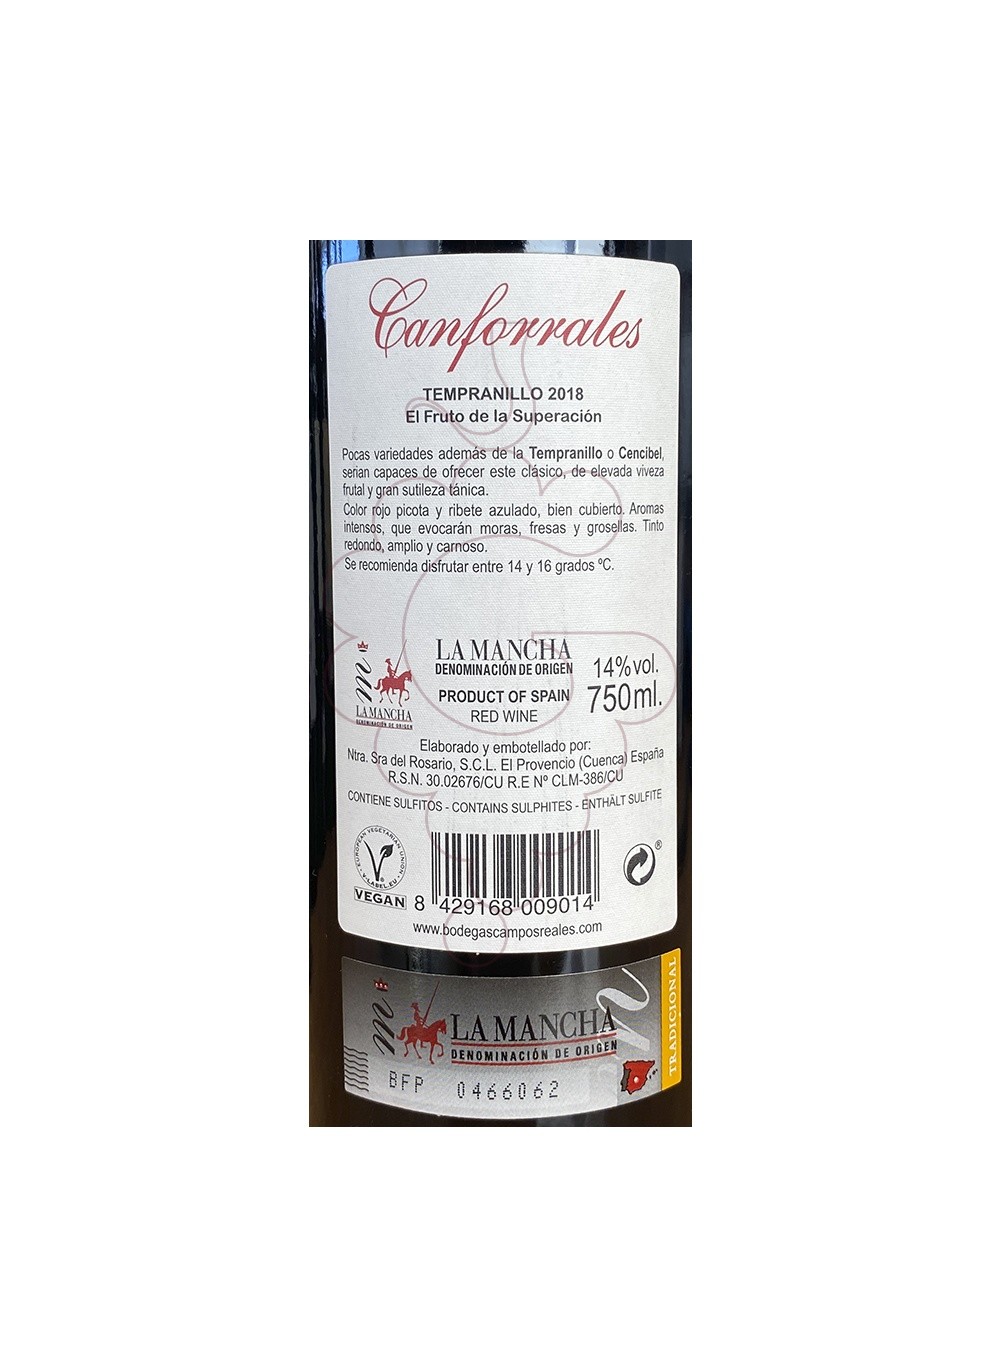 Photo Canforrales Tempranillo vin rouge